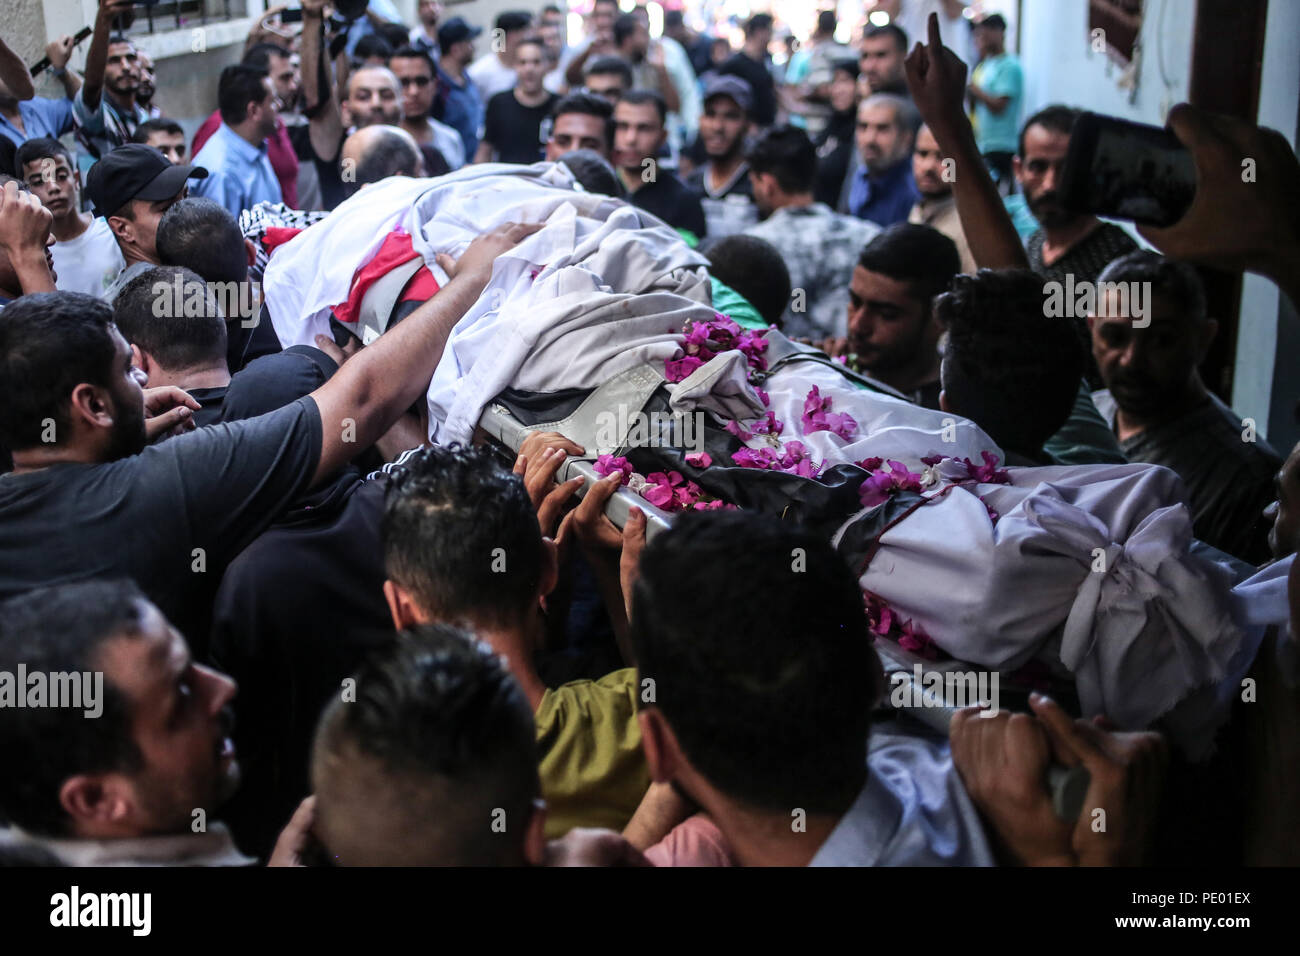 Relatives to the deceased seen mourning Funeral of Medic martyr Abdullah qutati, 22 Years old who died on the eastern border of the city of Khan Youns Stock Photo